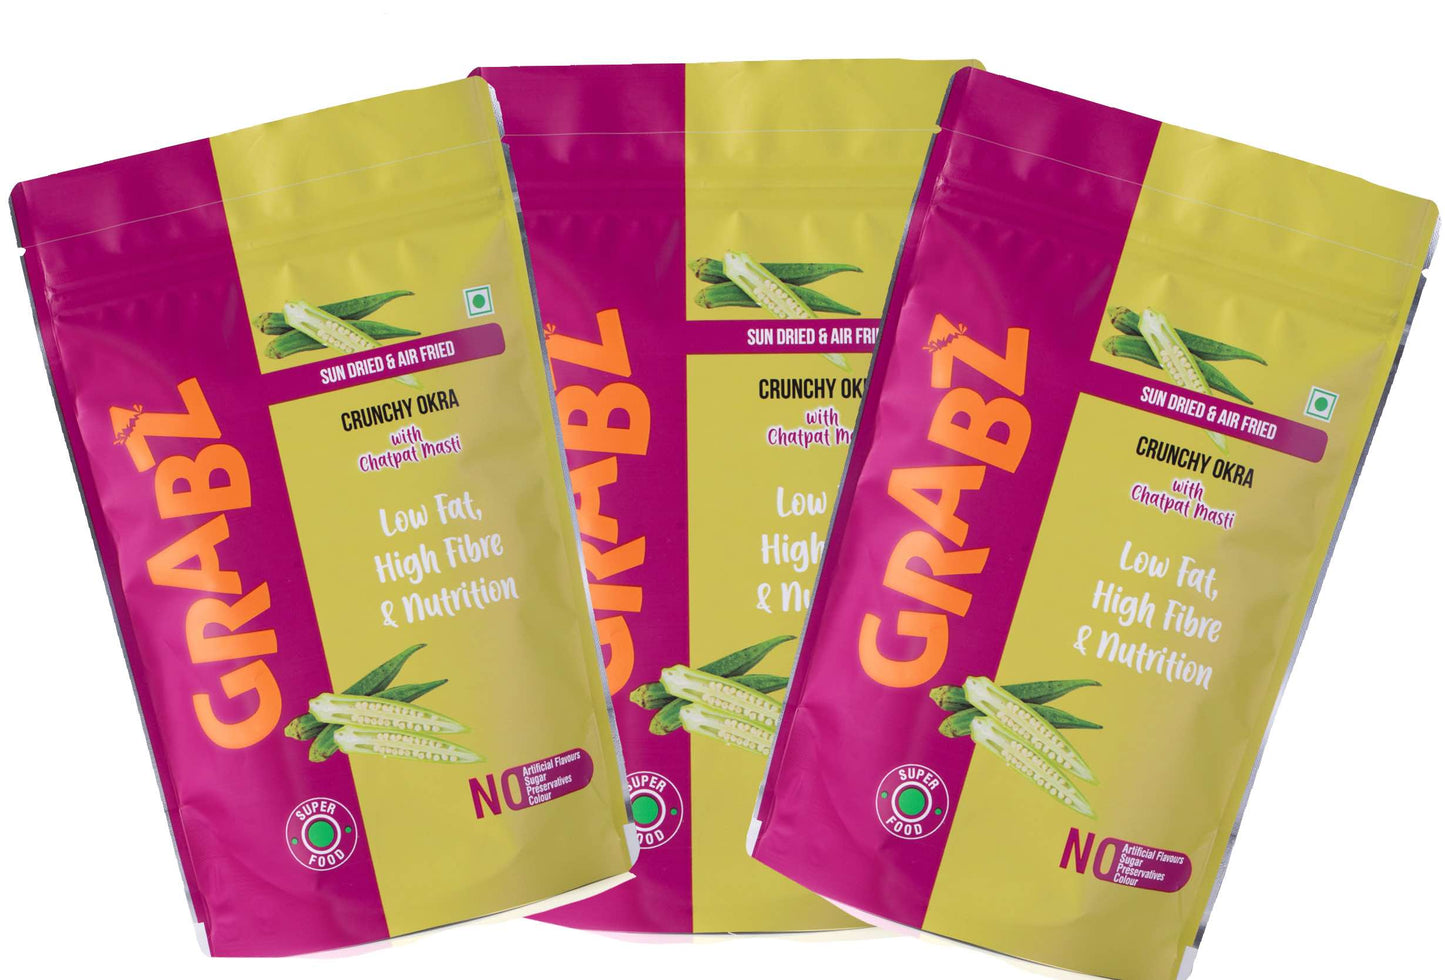 Grabz Air fried Chatpat Masti Okra Vegetable Chips (2x30 grams) without oil ,sprinkled olive oil and herbs